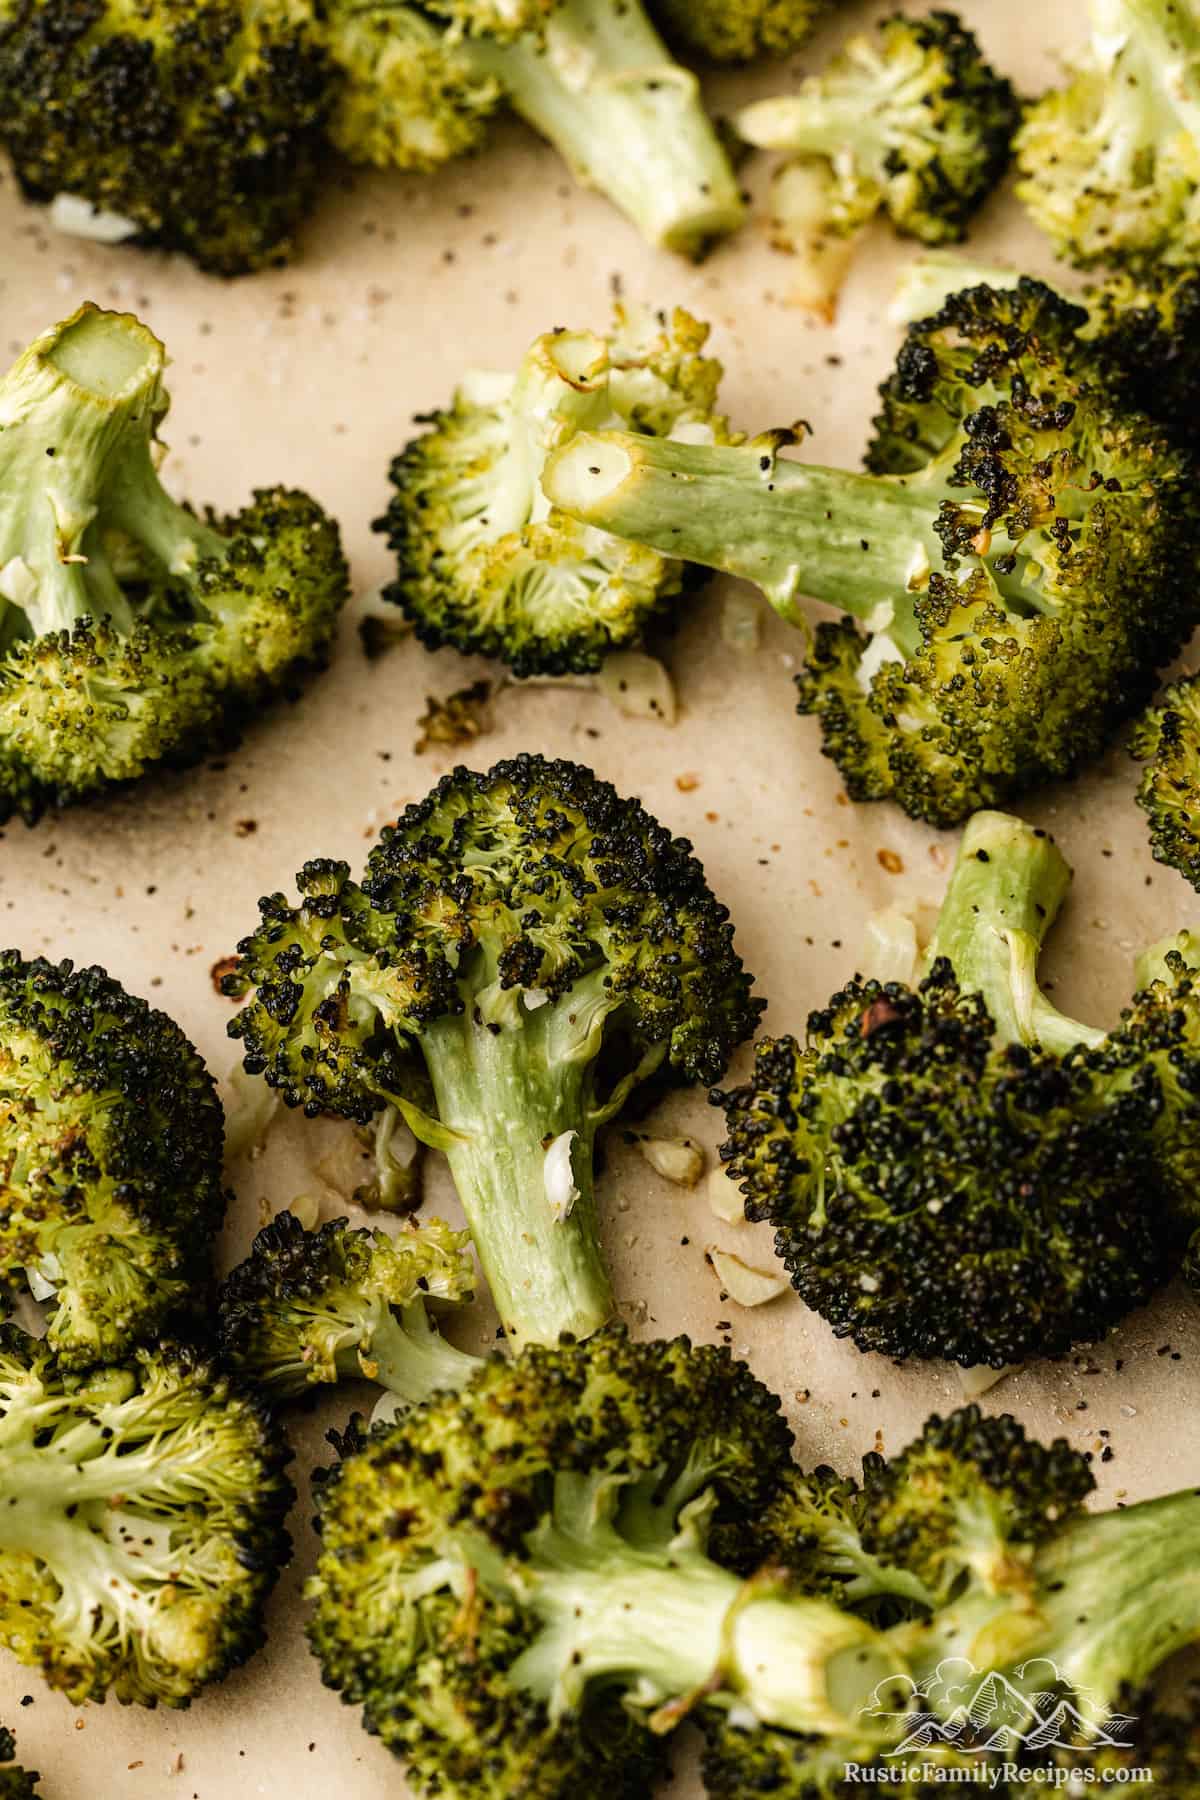 Roasted broccoli on parchment paper